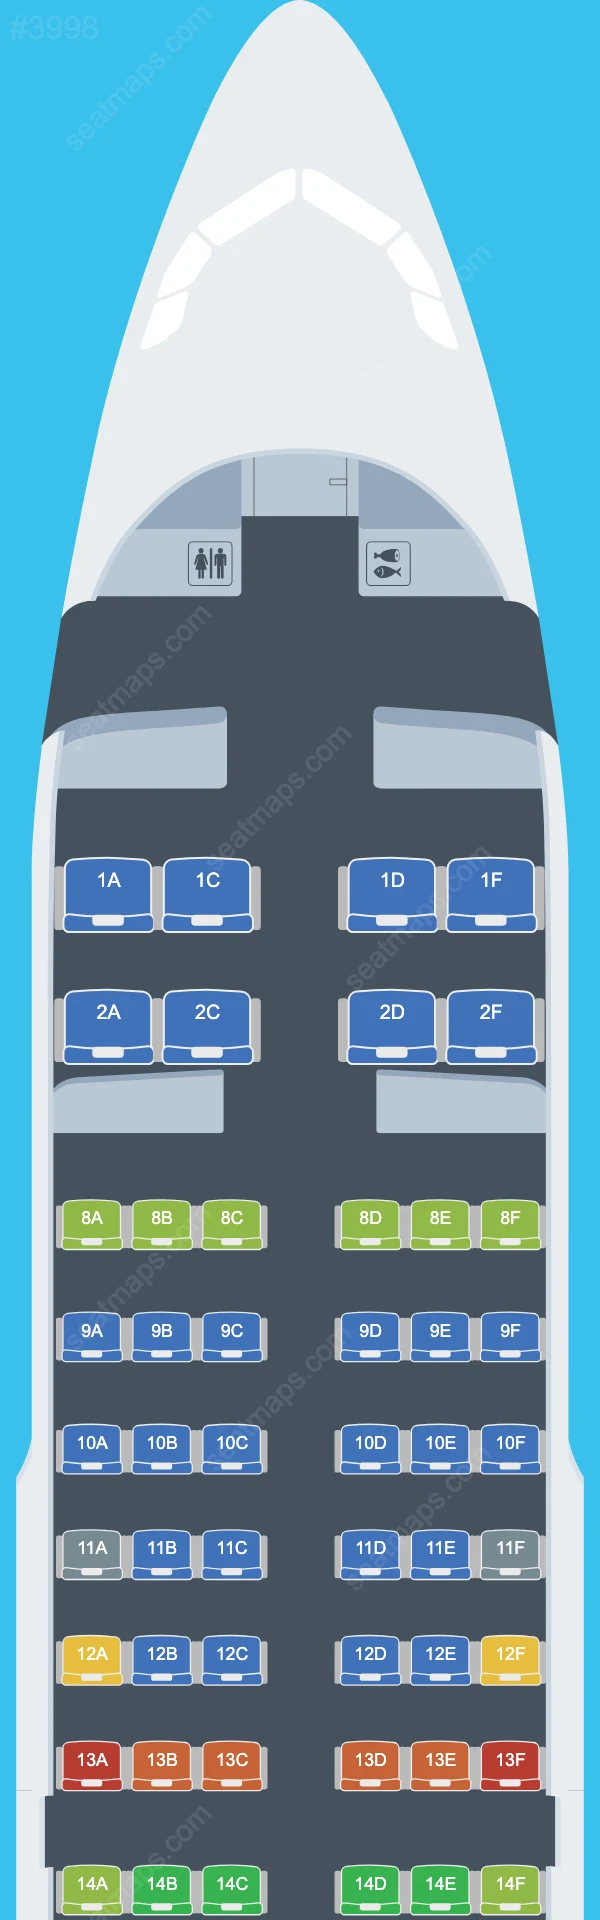 American Airlines Airbus A319 Seat Maps A319-100